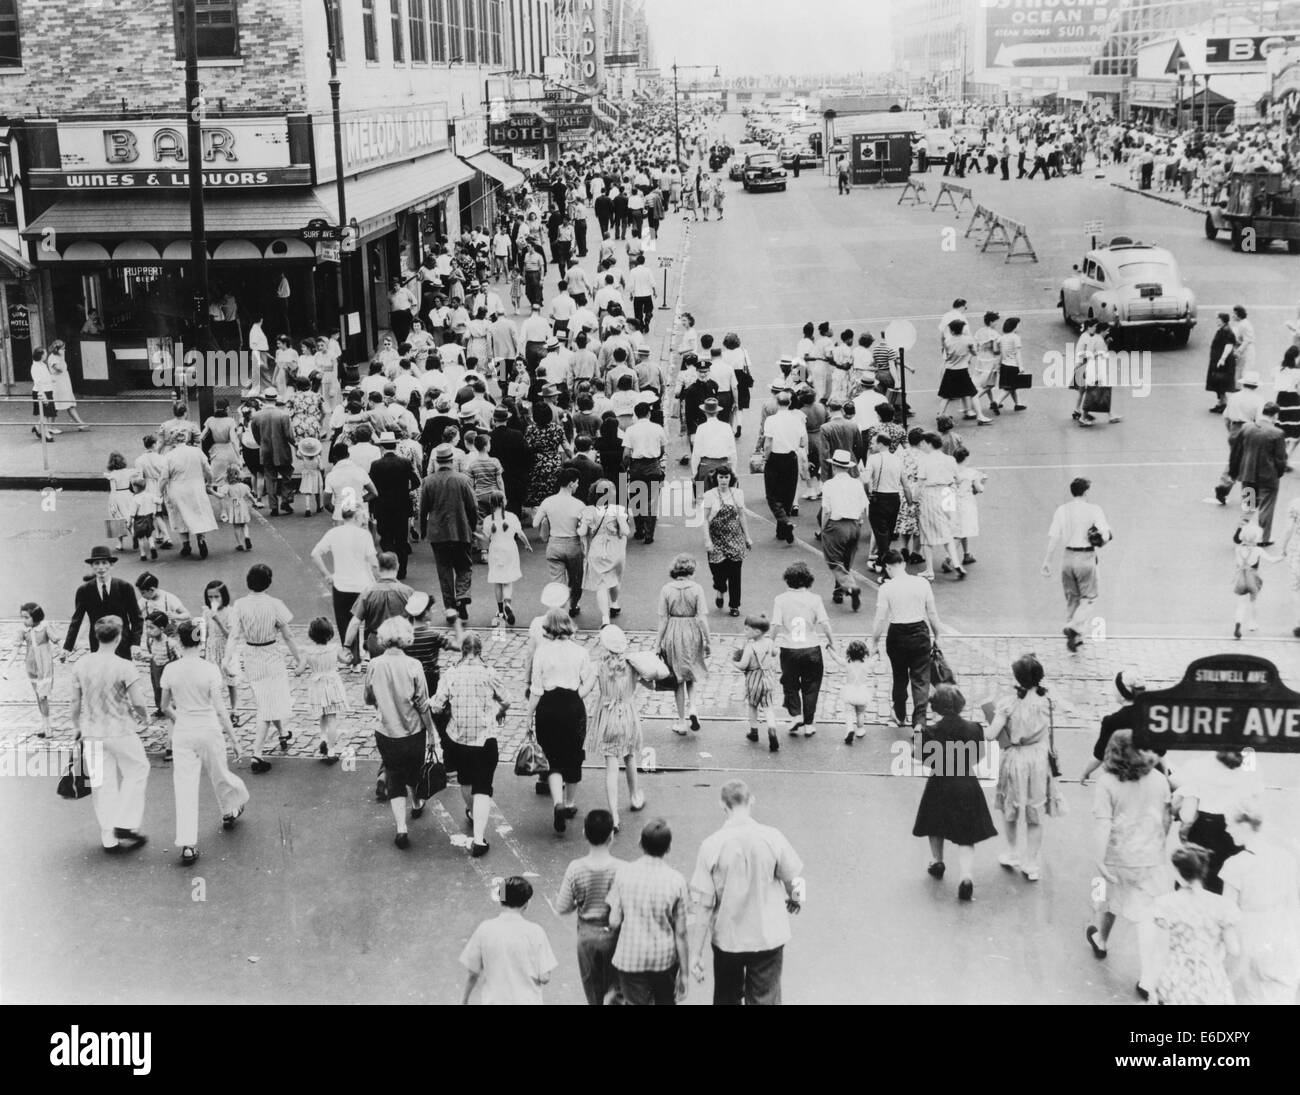 Crowded Street Scene at Intersection of Surf and Stillwell Avenues, Coney Island, New York City, USA, 1944 Stock Photo